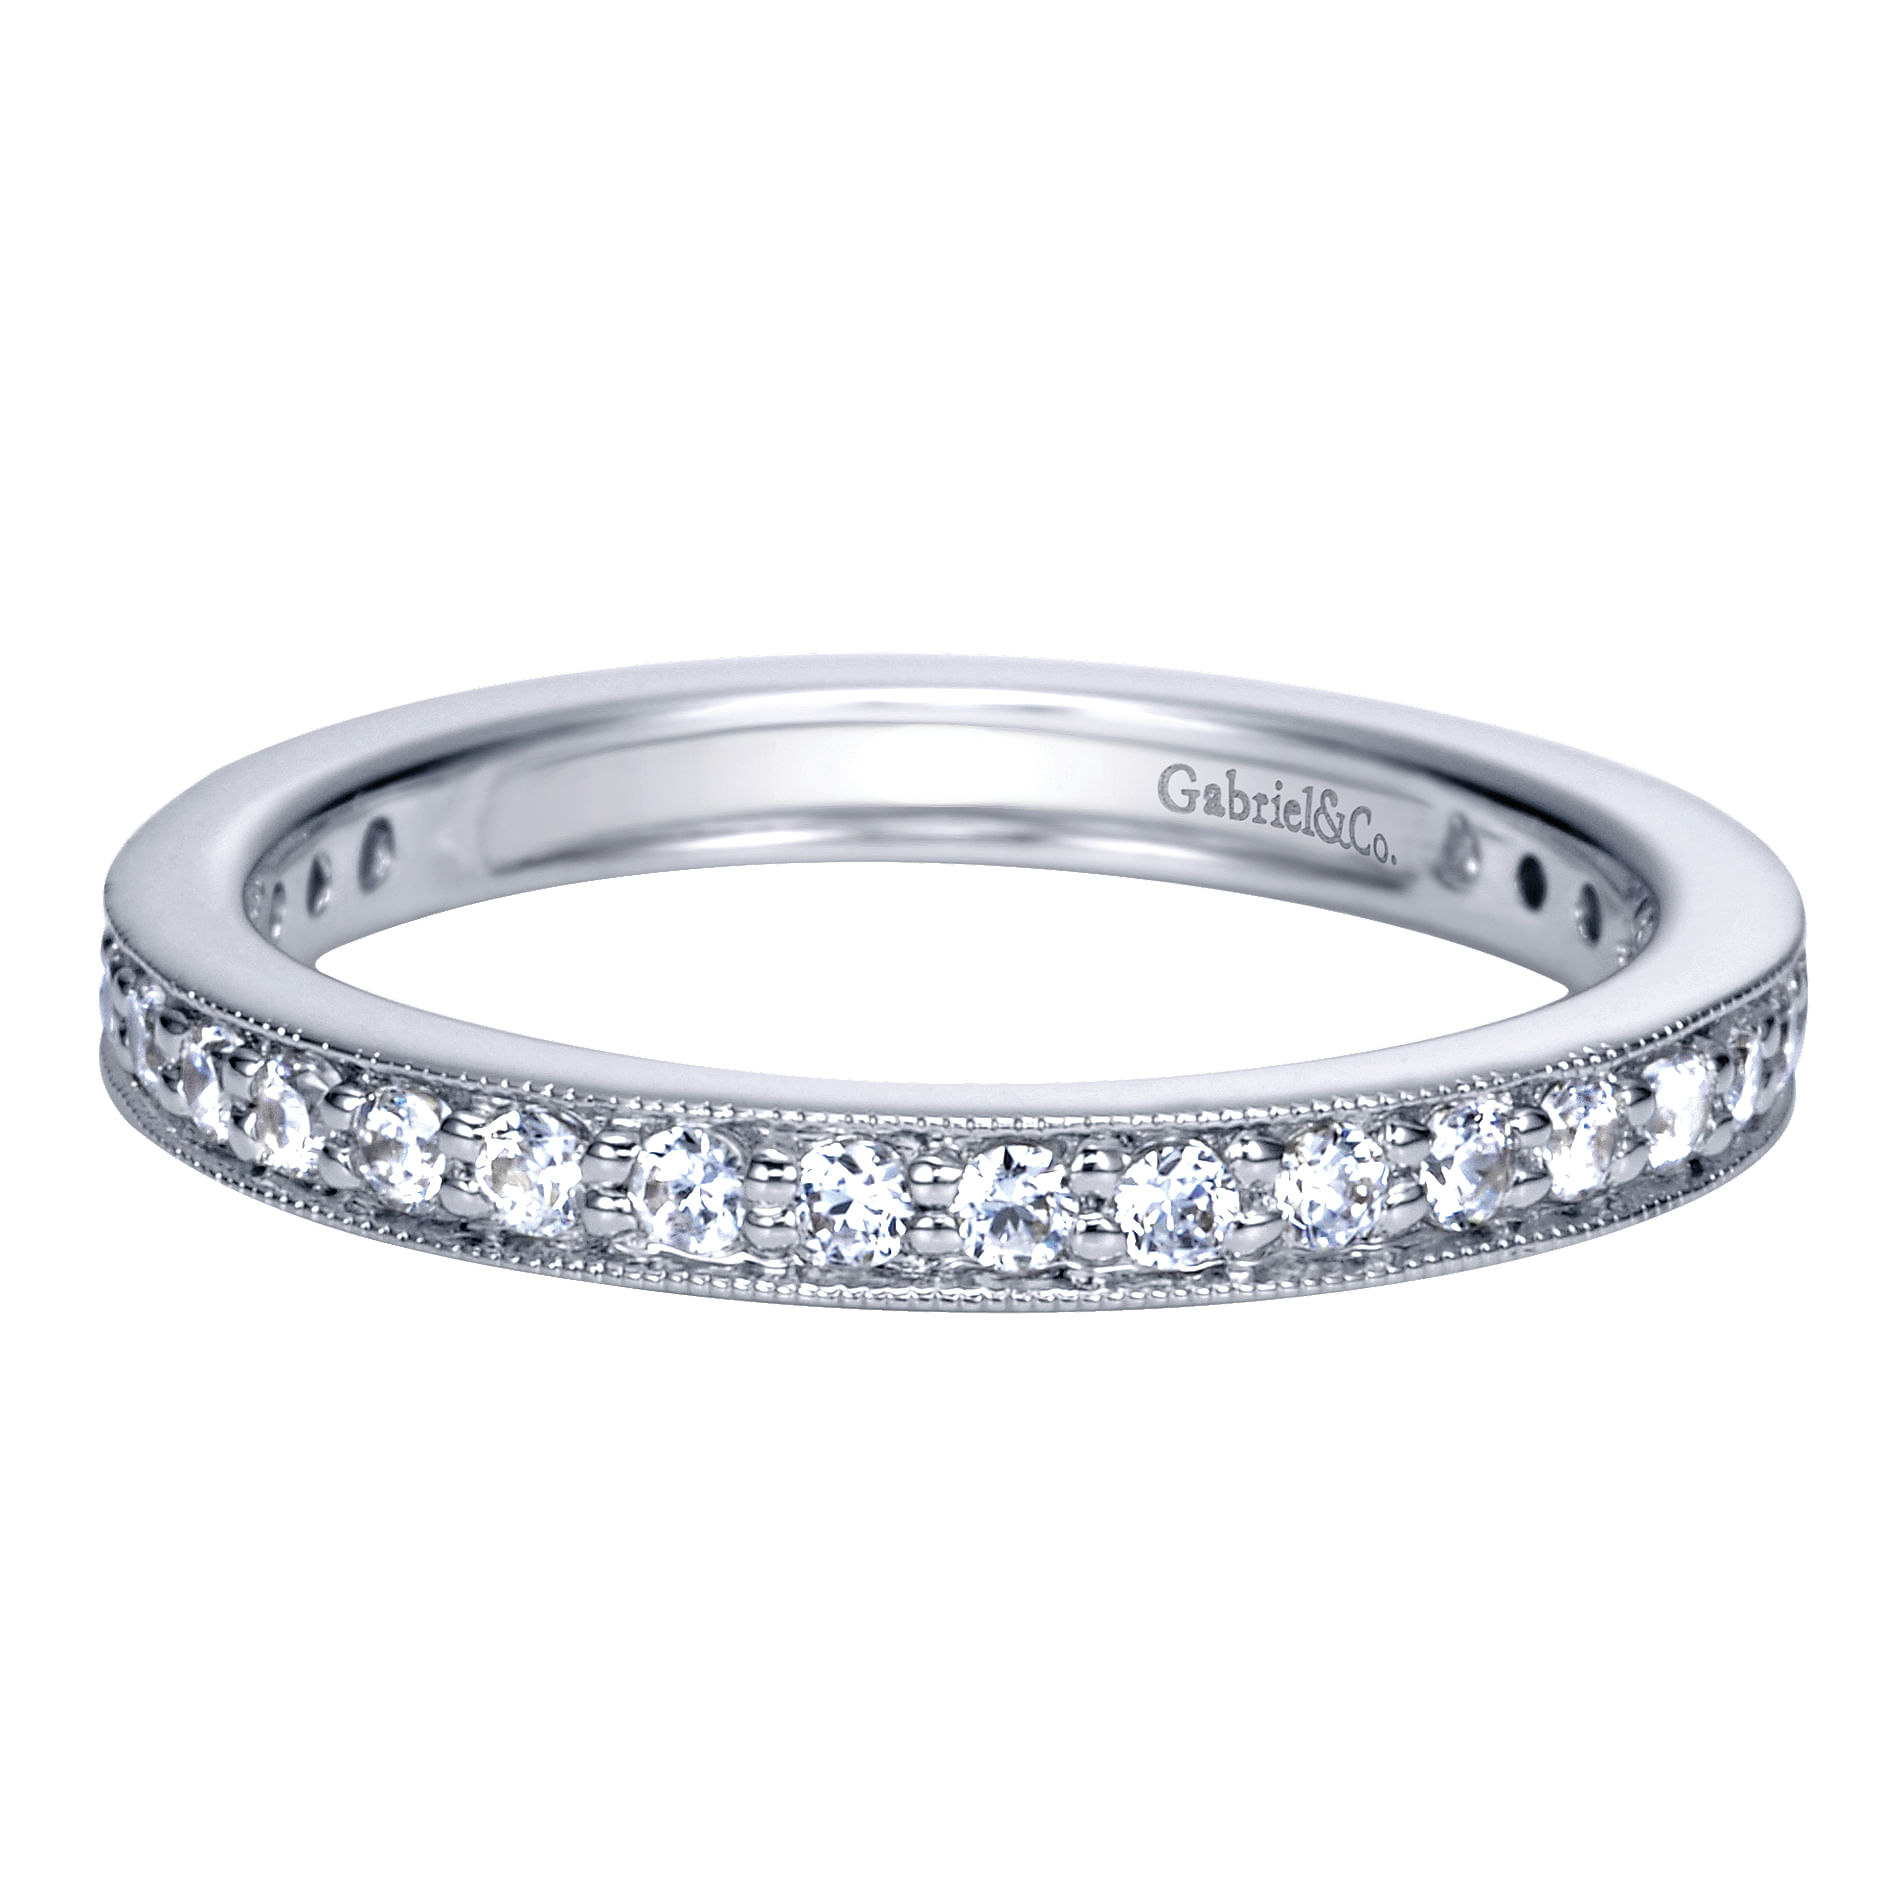 Calabria - 14K White Gold Channel Prong Diamond Eternity Band with Millgrain